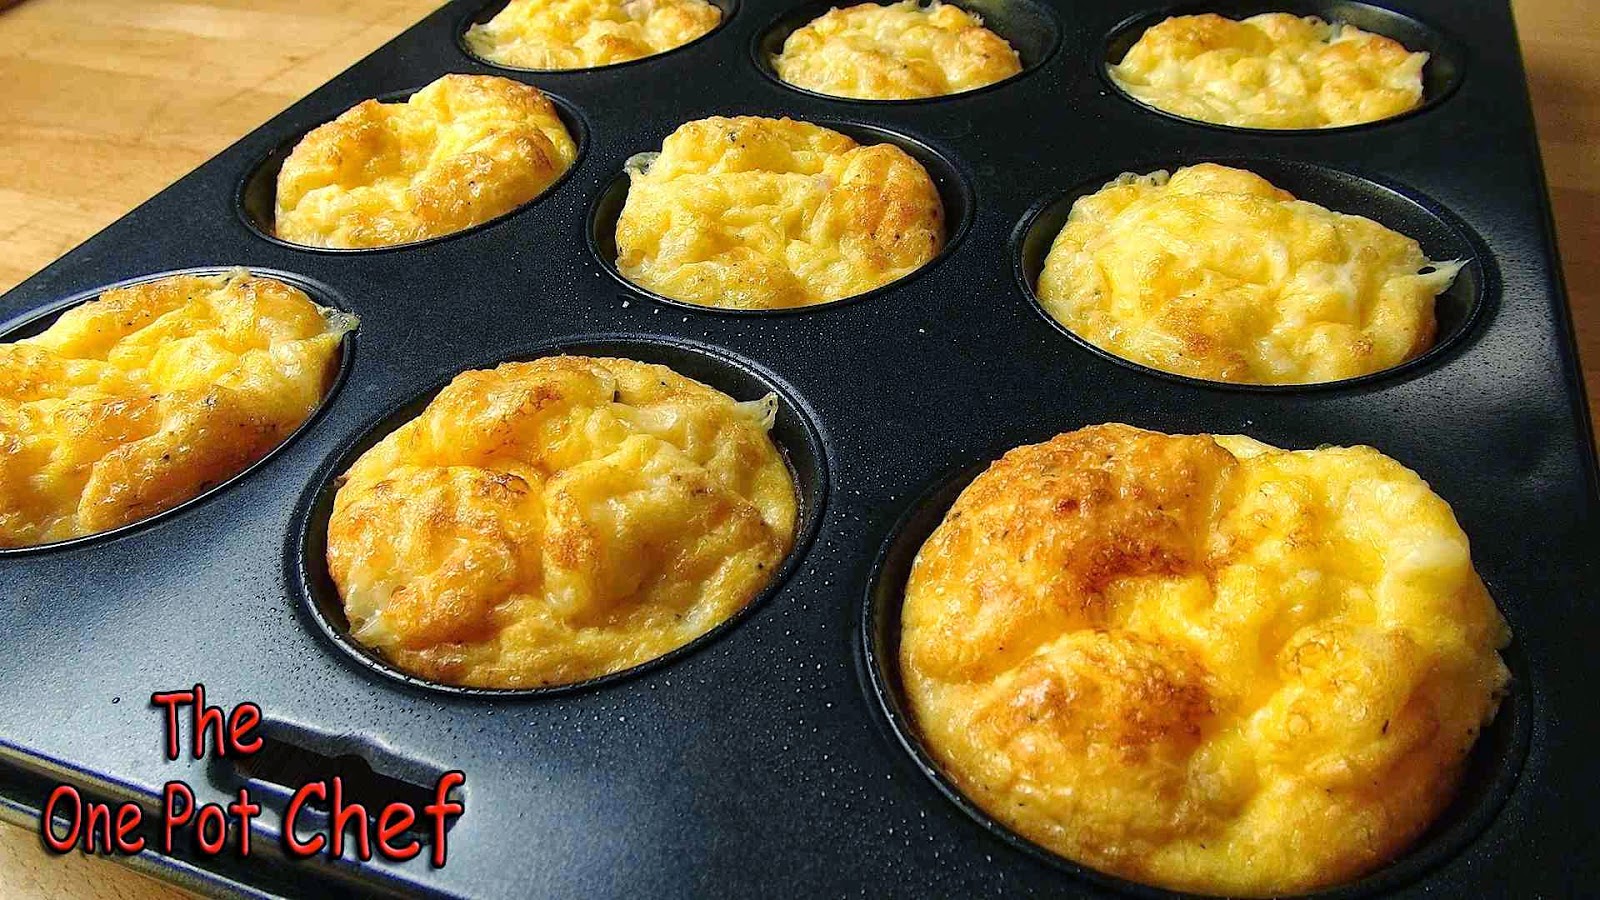 The One Pot Chef Show: Oven Baked Mini Omelettes - RECIPE